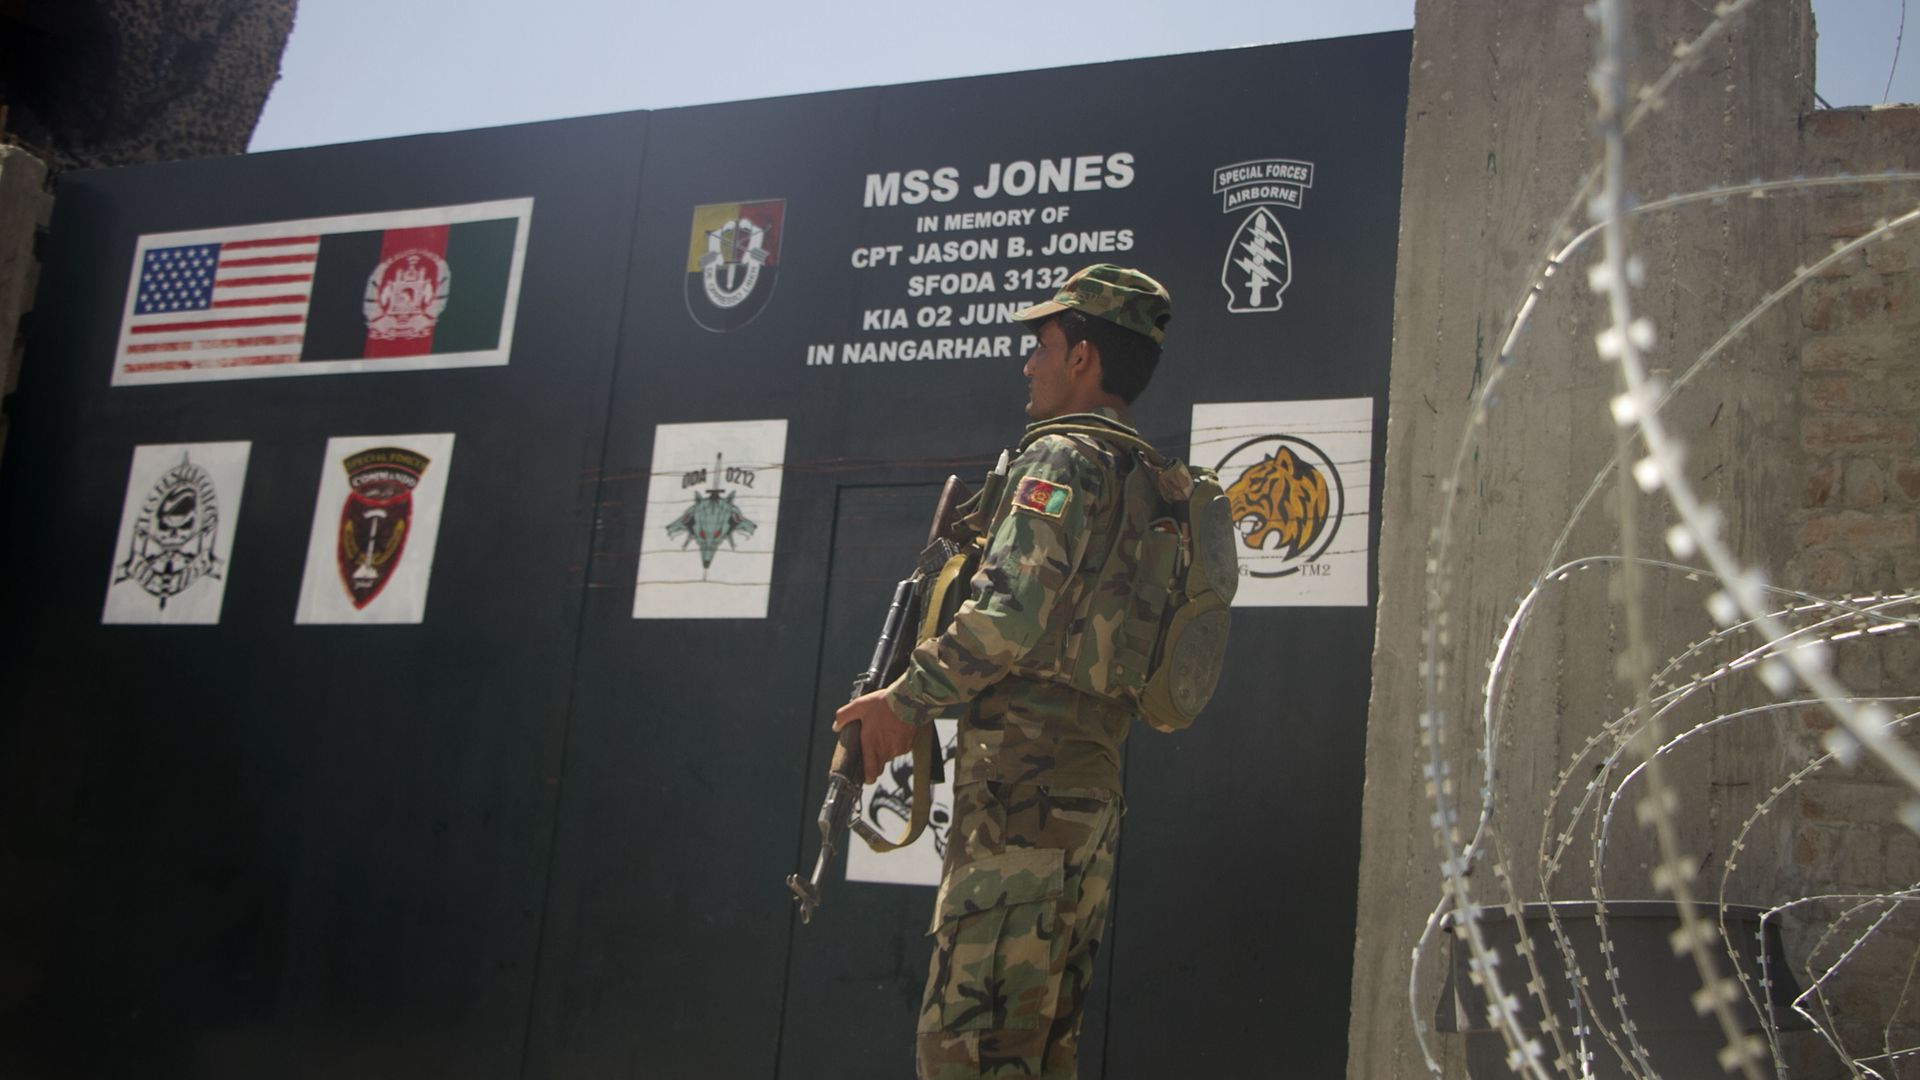 An Afghan border forces soldier stands guard at a U.S. forces base which has been handed over to Afghan border forces in Dih Bala district of Nangarhar province, eastern Afghanistan, July 20